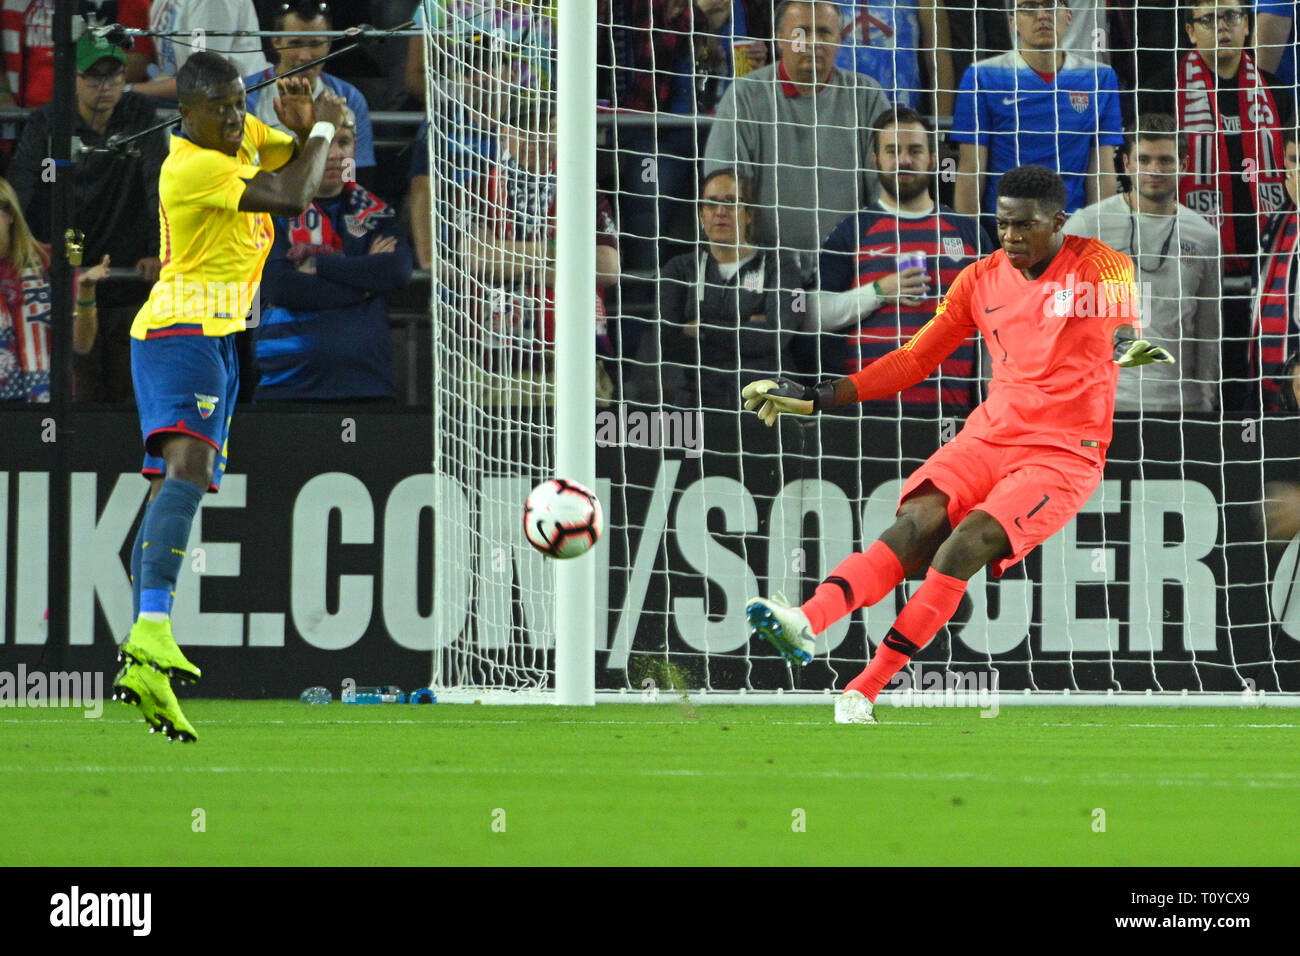 Orlando, Florida, USA. 21st Mar, 2019. US goalkeeper Sean Johnson (1) in action during an international friendly between the US and Ecuador at Orlando City Stadium on March 21, 2019 in Orlando, Florida. © 2019 Scott A. Miller. Credit: Scott A. Miller/ZUMA Wire/Alamy Live News Stock Photo